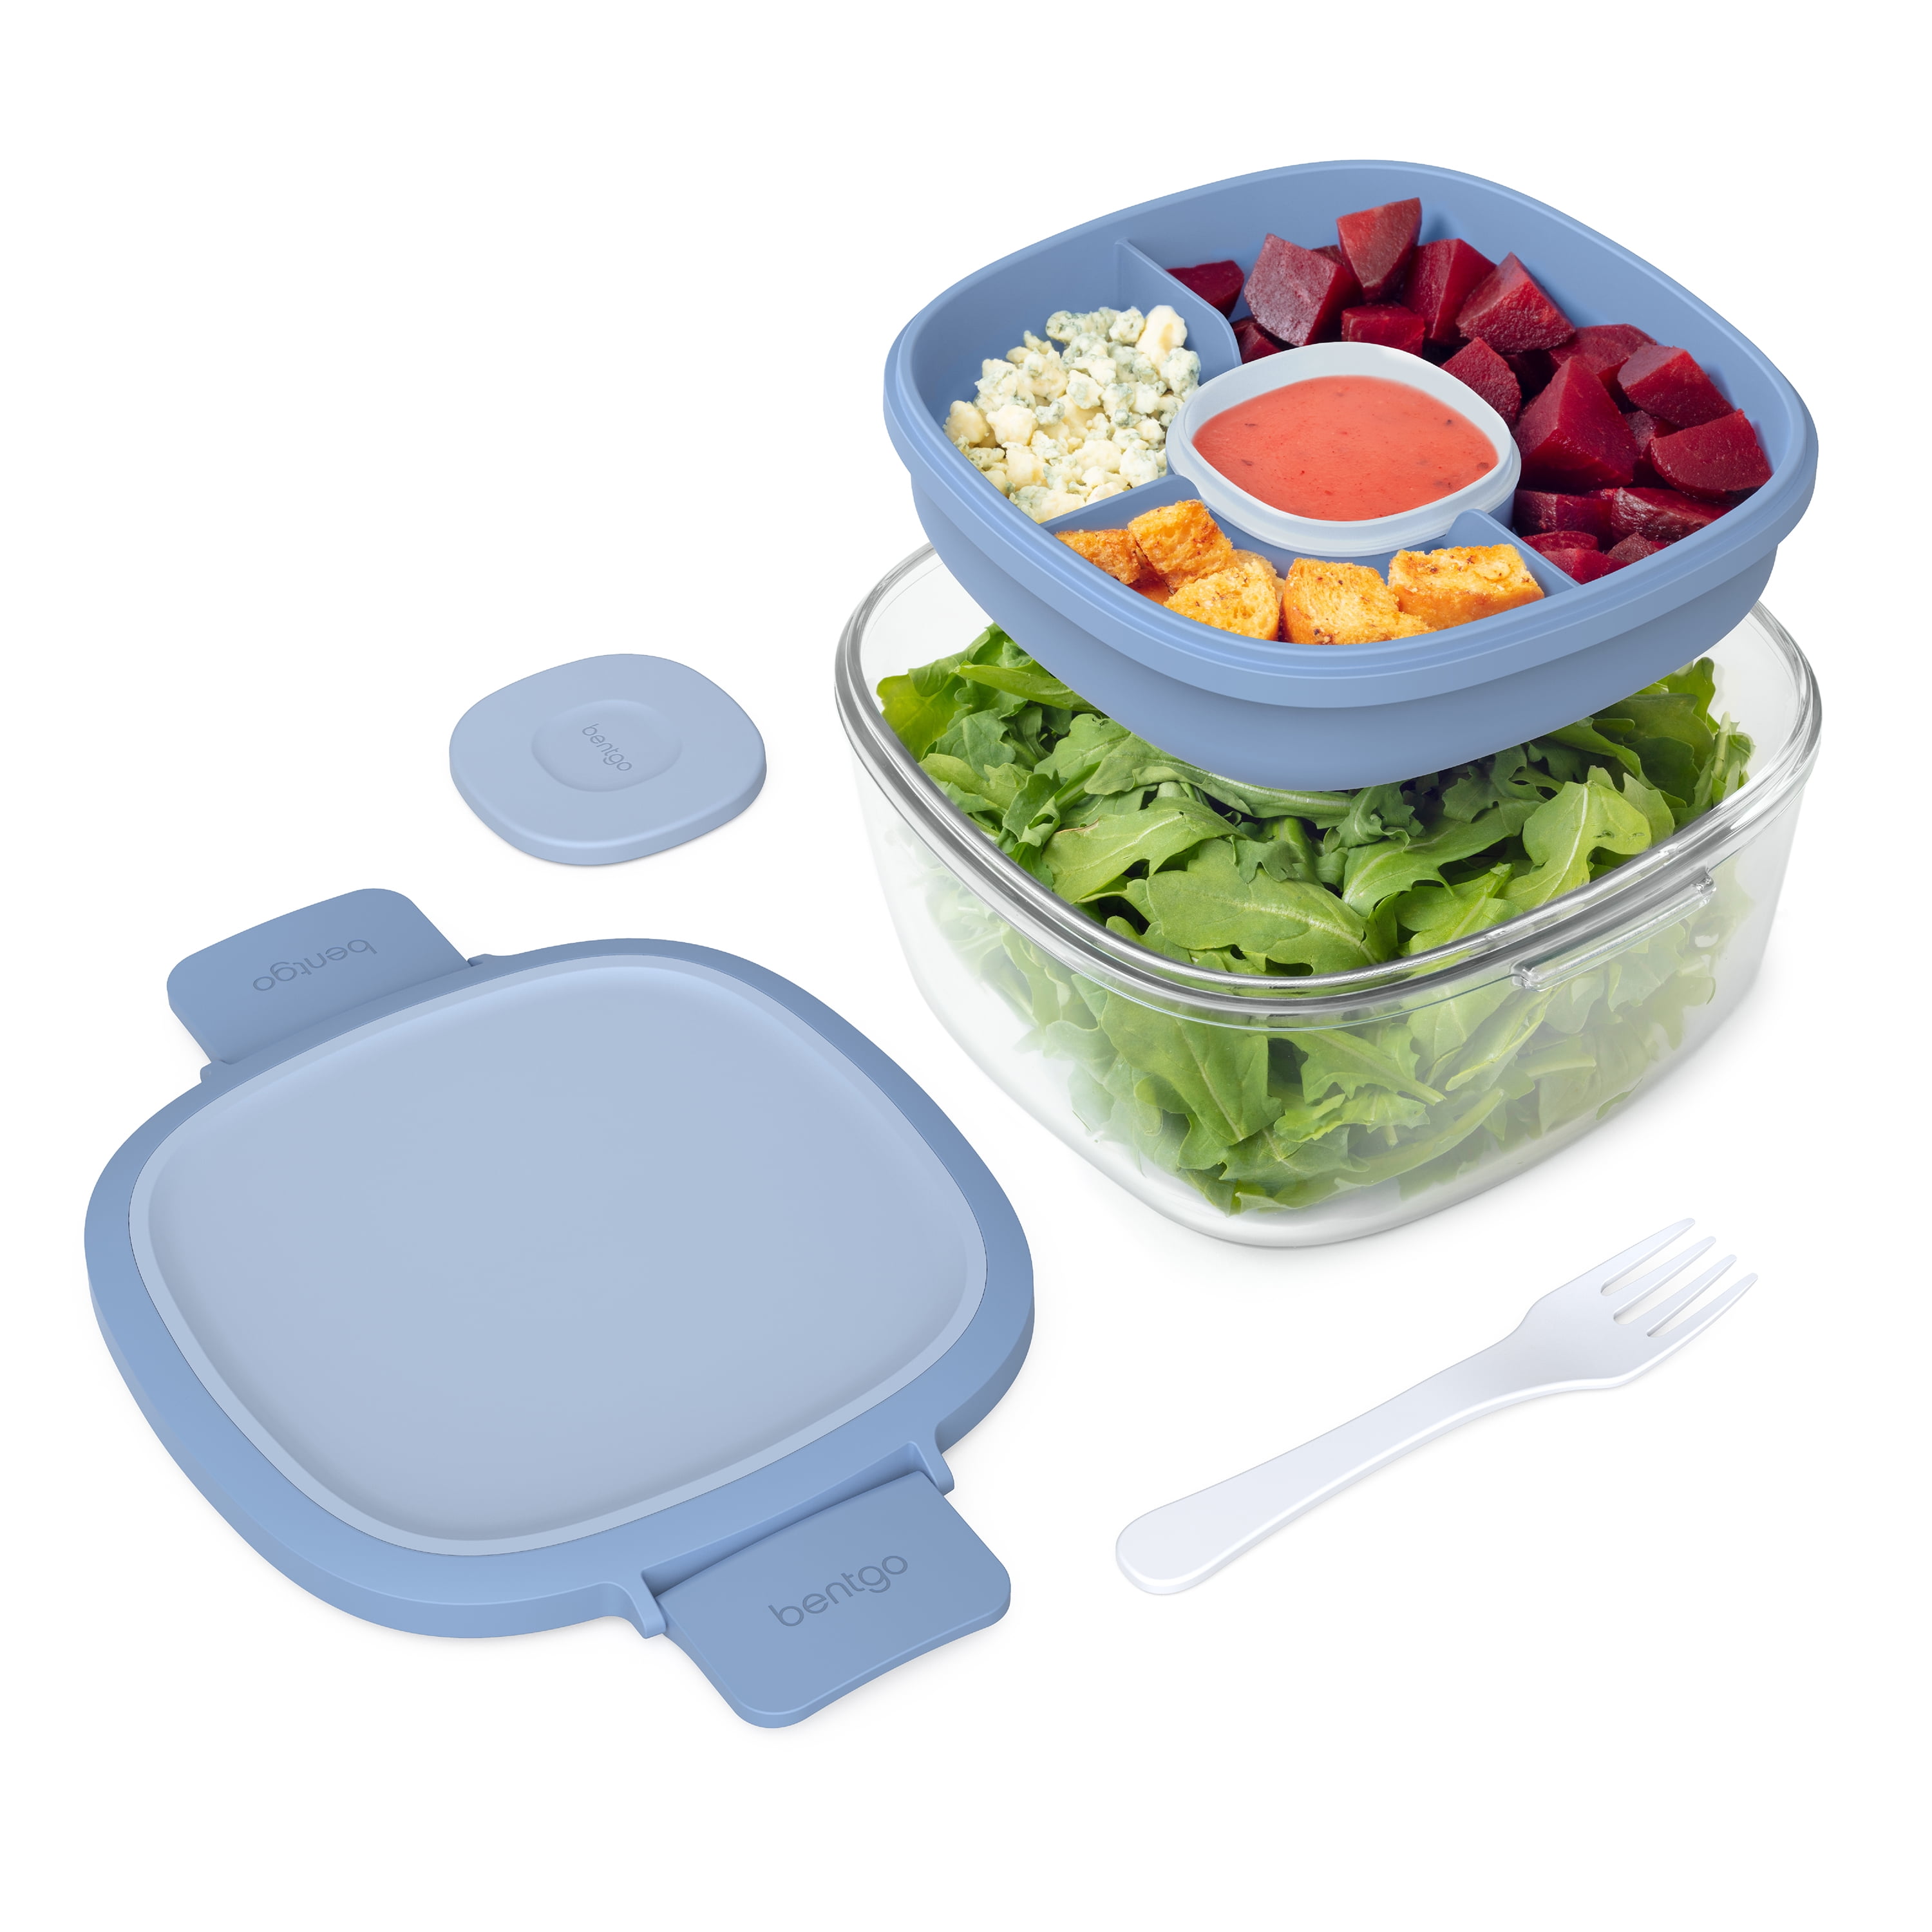 Loobuu 52 oz to Go Salad Container Lunch Container, BPA-Free, 3-Compartment for Salad Toppings and Snacks, Salad Bowl with Dressing Container, Built